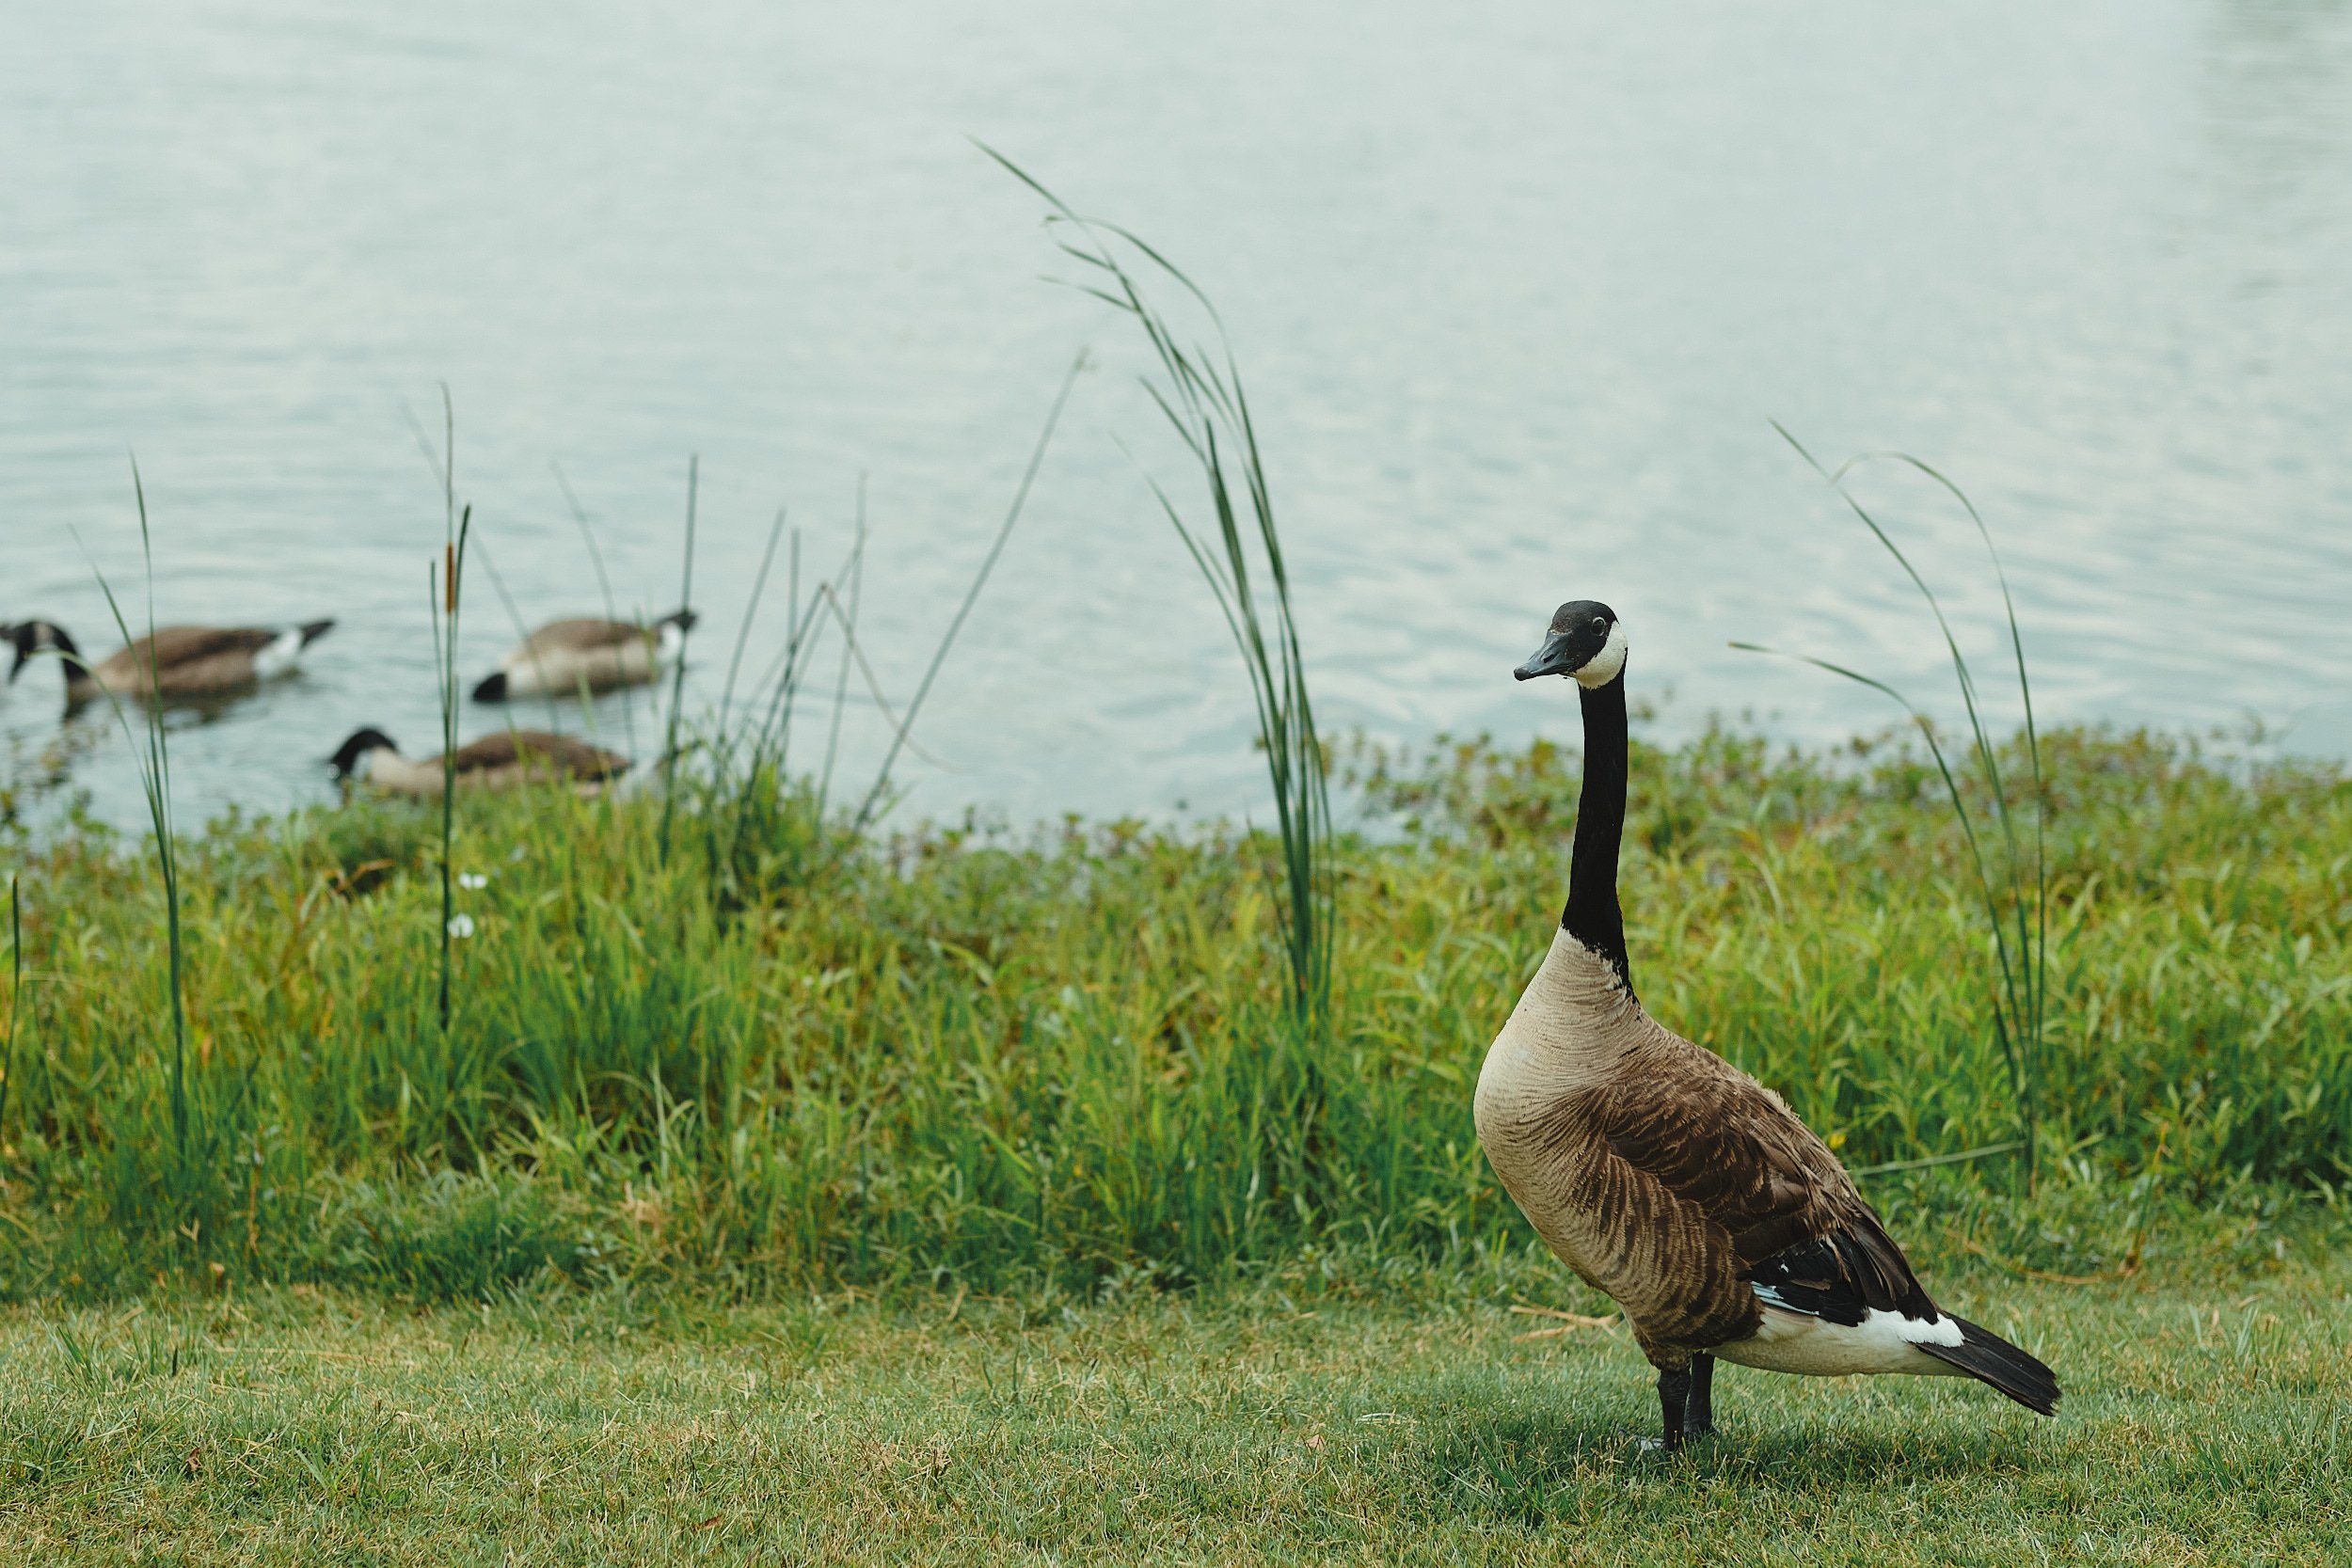 A color photograph of a majestic goose. The goose eyes the cameraman. There are weeds, more geese, and water in the background.